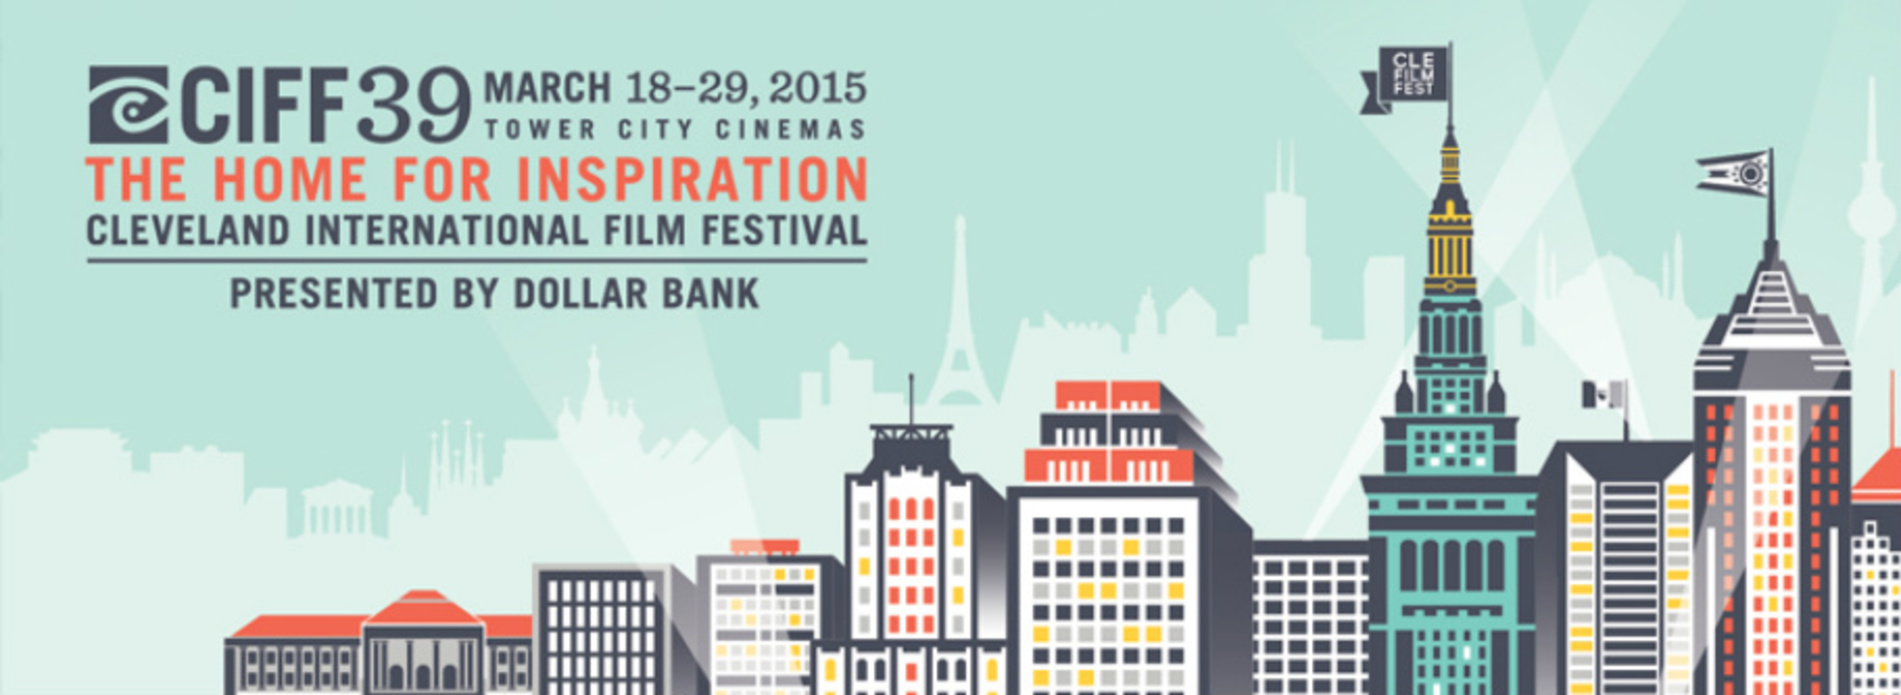 The 2015 FilmForums Series in partnership with the Cleveland International Film Festival, Part 1